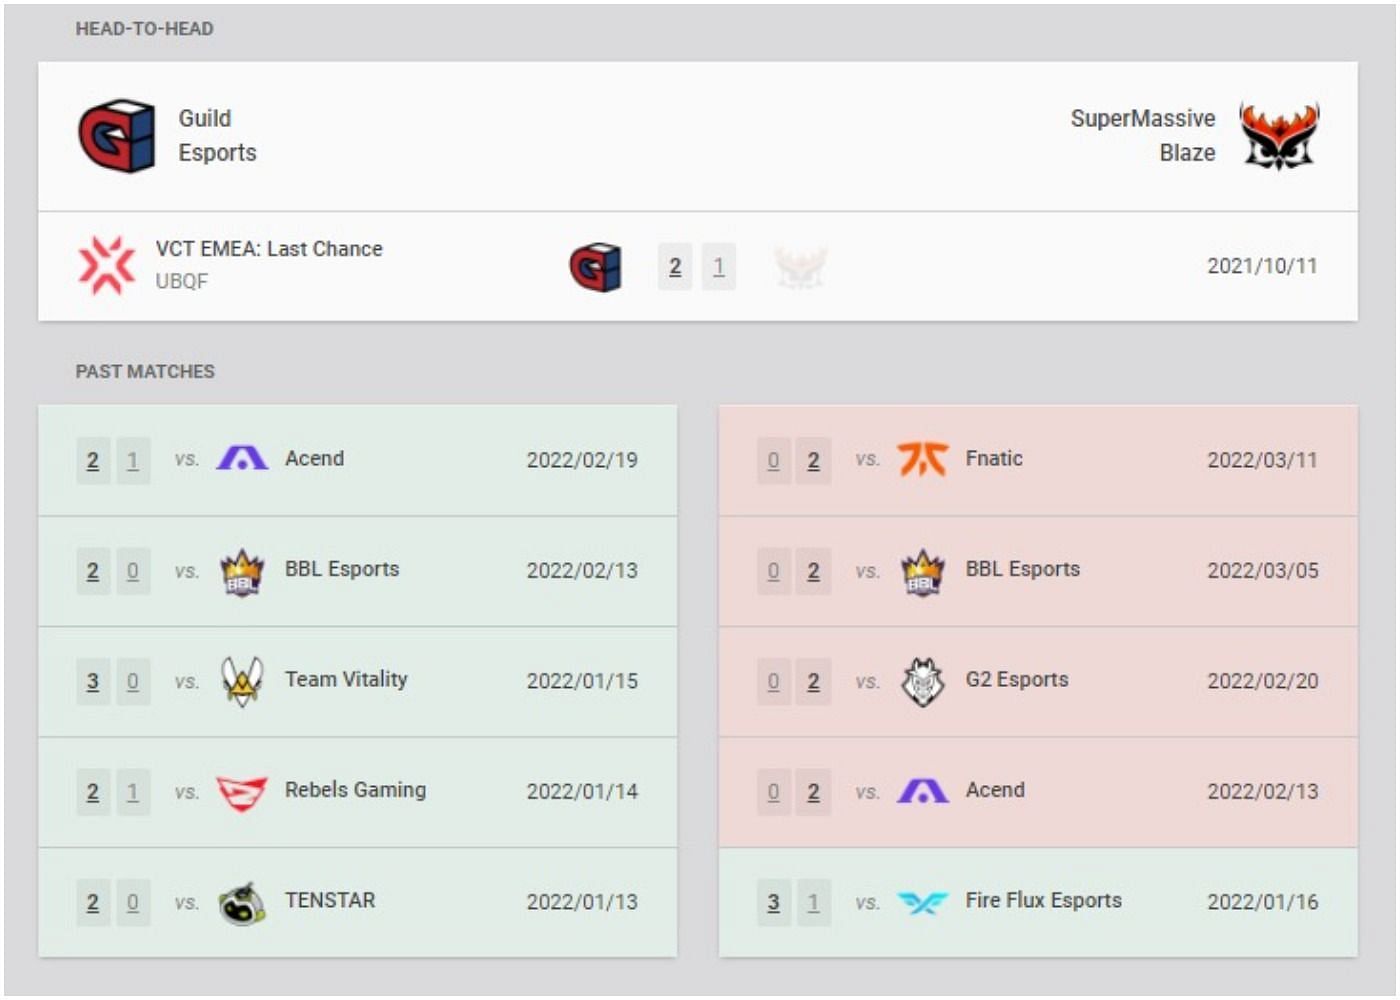 Guild Esports and SuperMassive Blaze recent results and head-to-head (Image via VLR.gg)